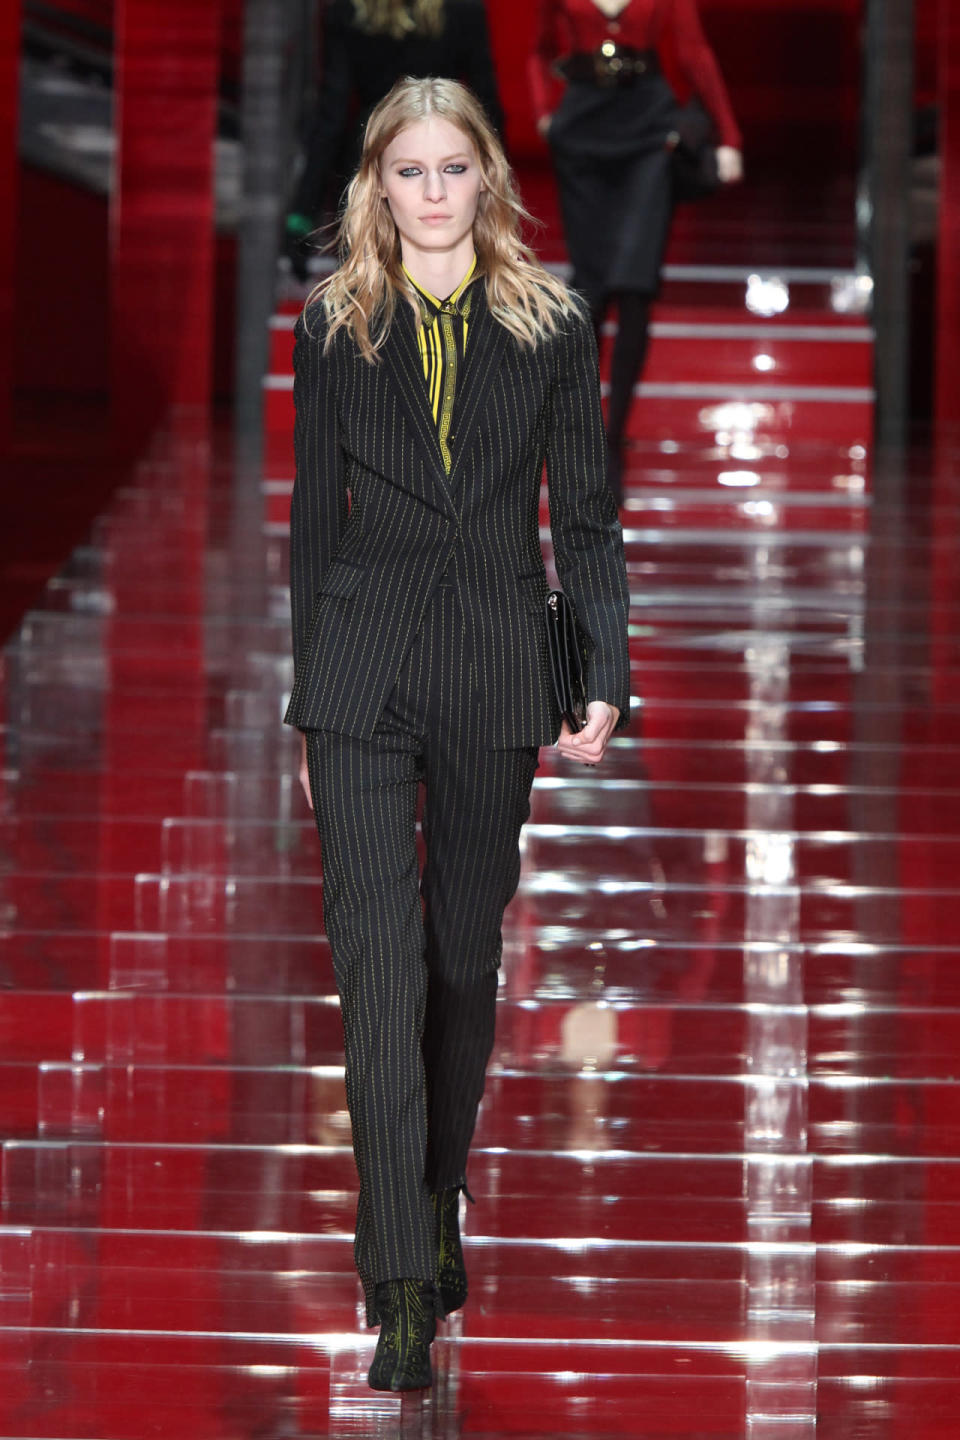 A classic pinstripe suit from the Versace’s Fall/Winter 2015 collection.